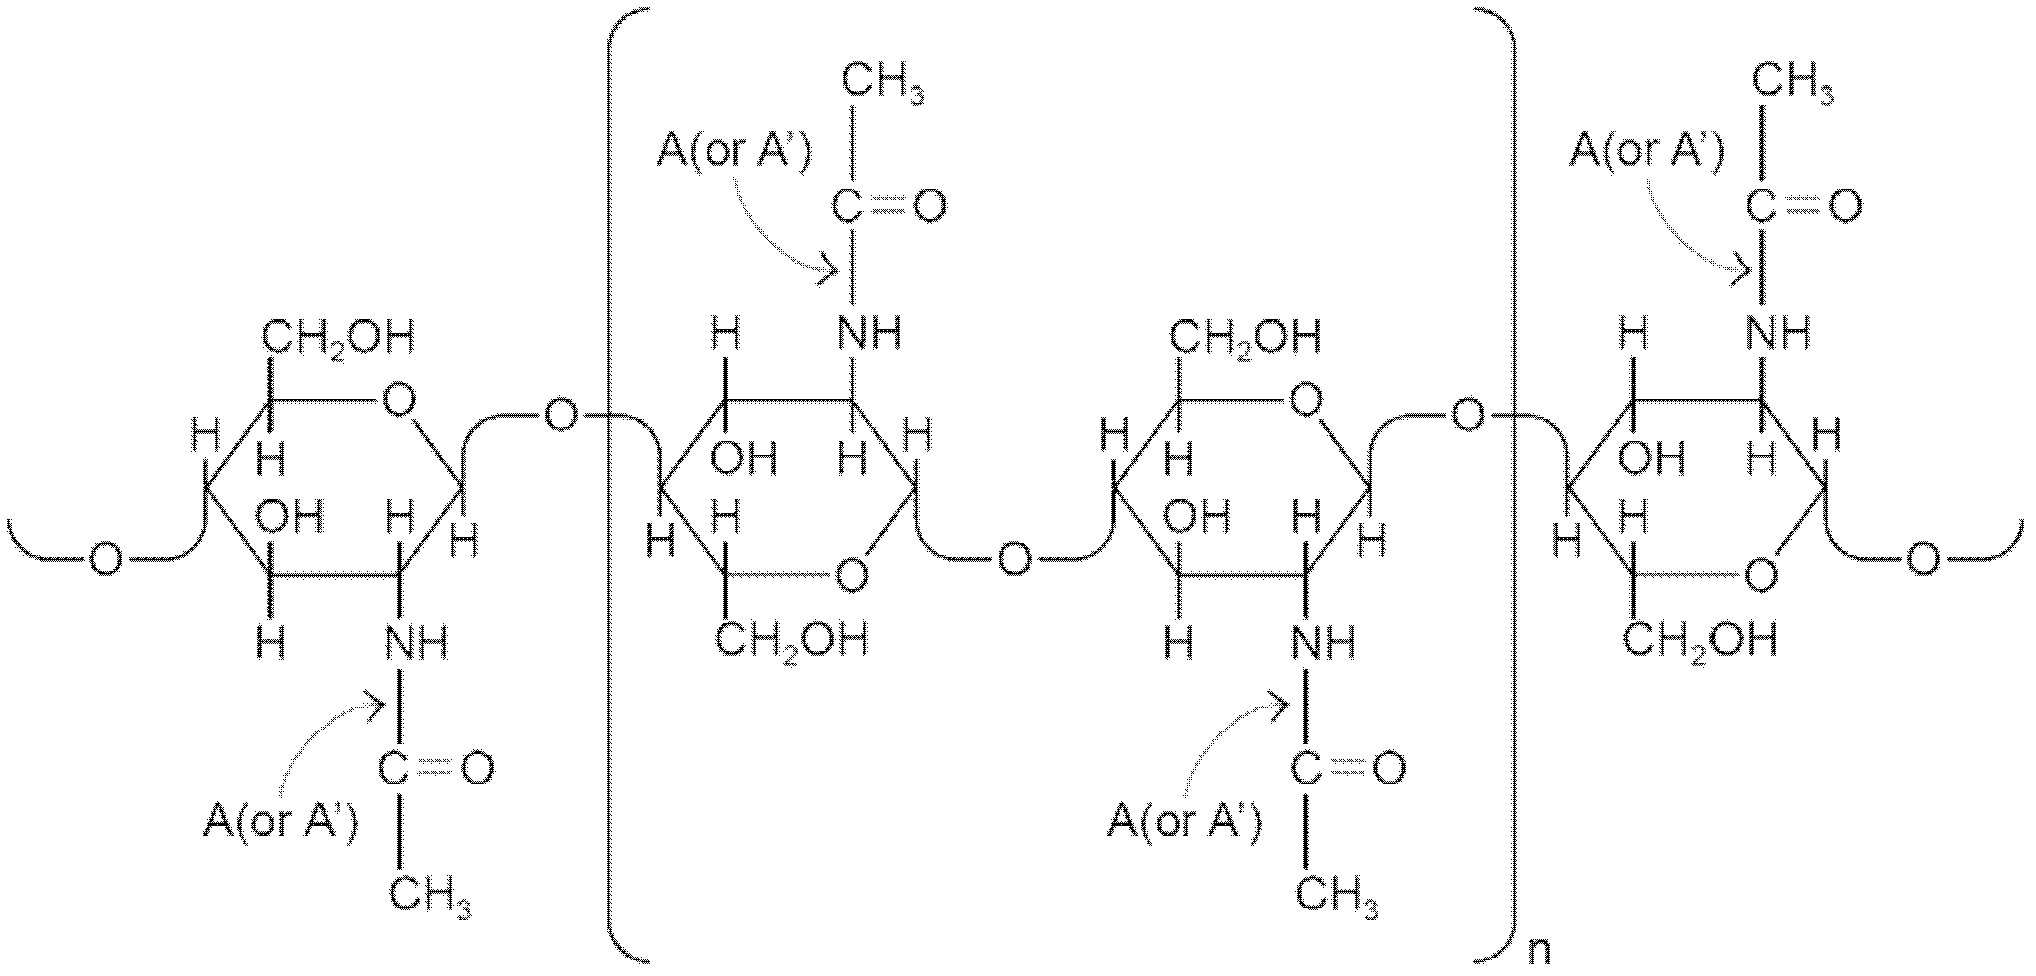 Deacetylation method for chitin